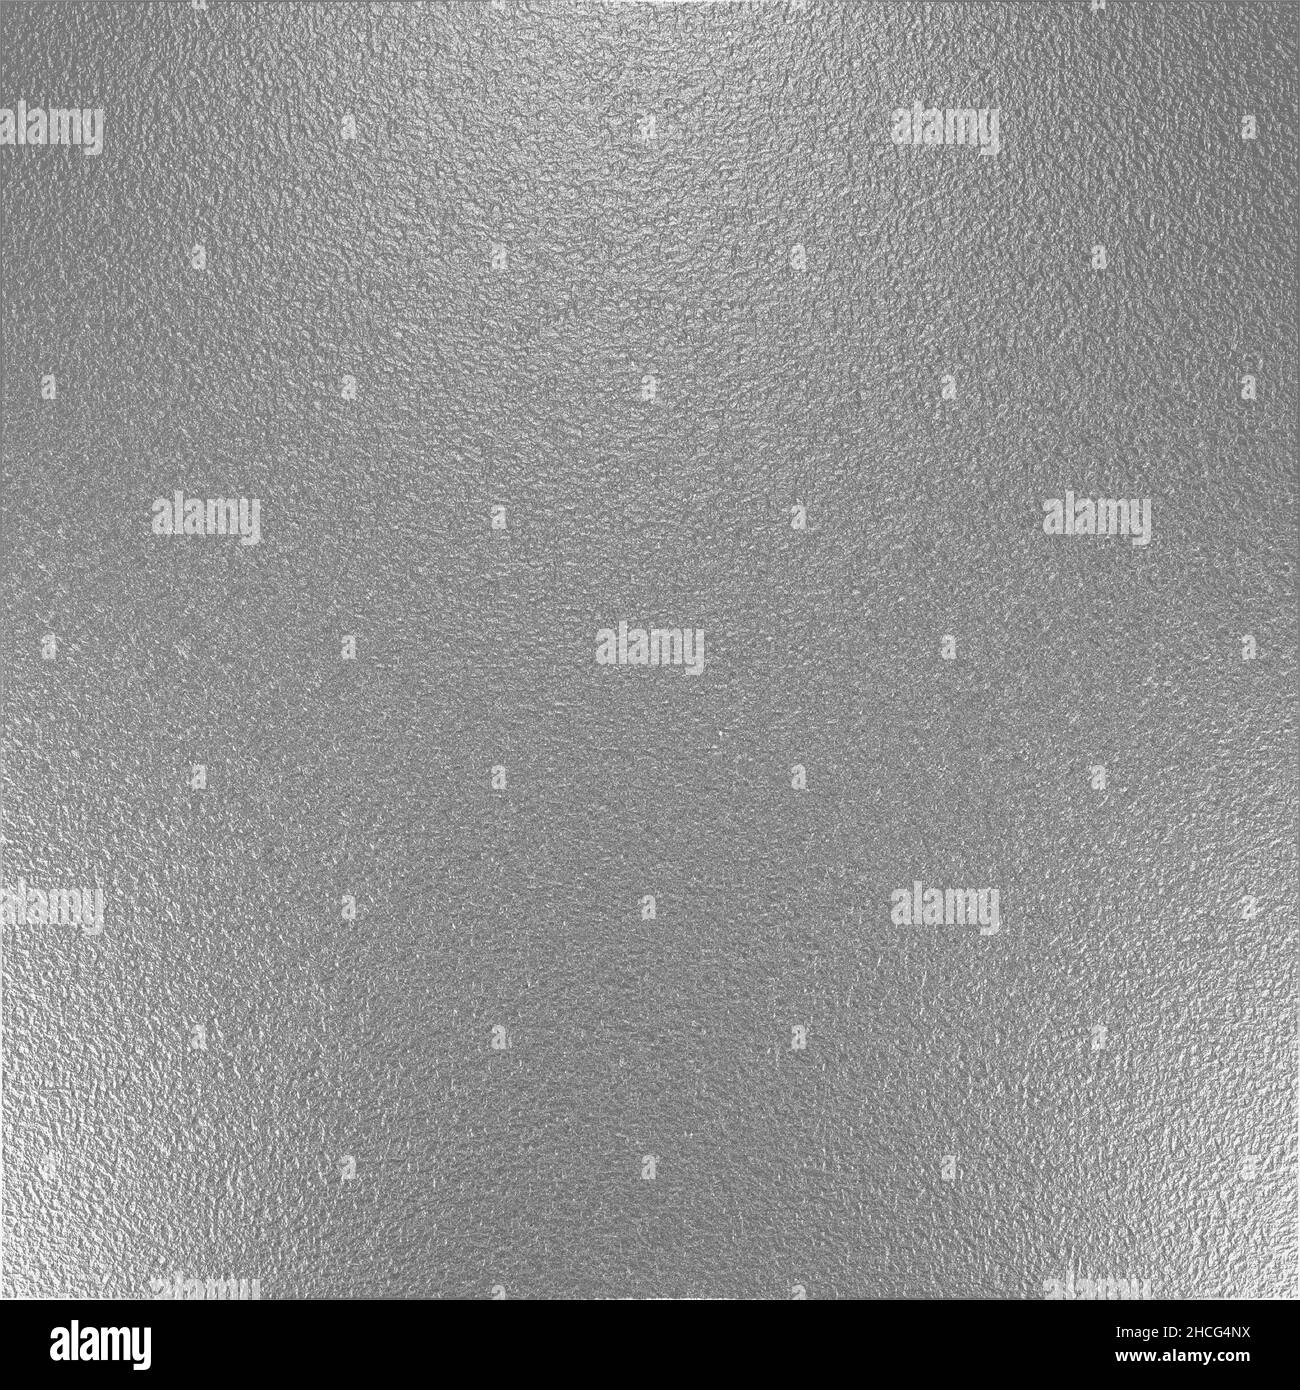 Stainless Steel Sheet Metal. Isolated.Close up of Brushed metal. Room to write. Stock image. Stock Photo